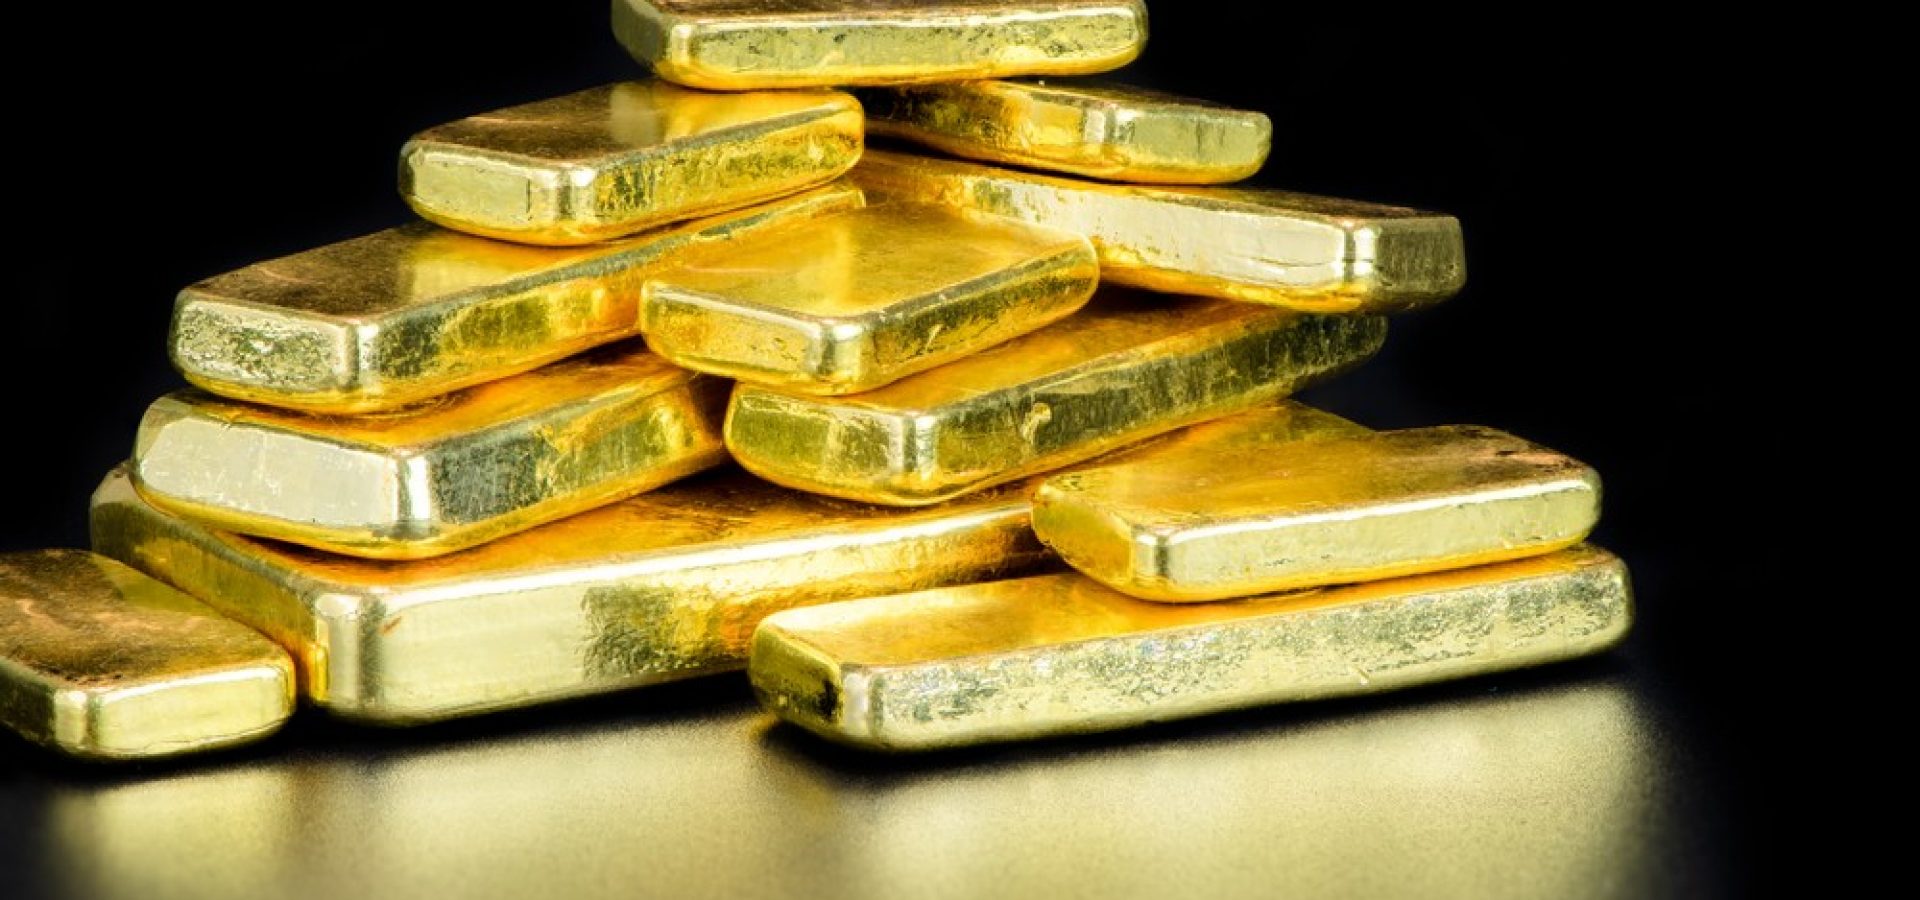 Wibest – Spot gold prices: Gold bars stacked up/ central bank